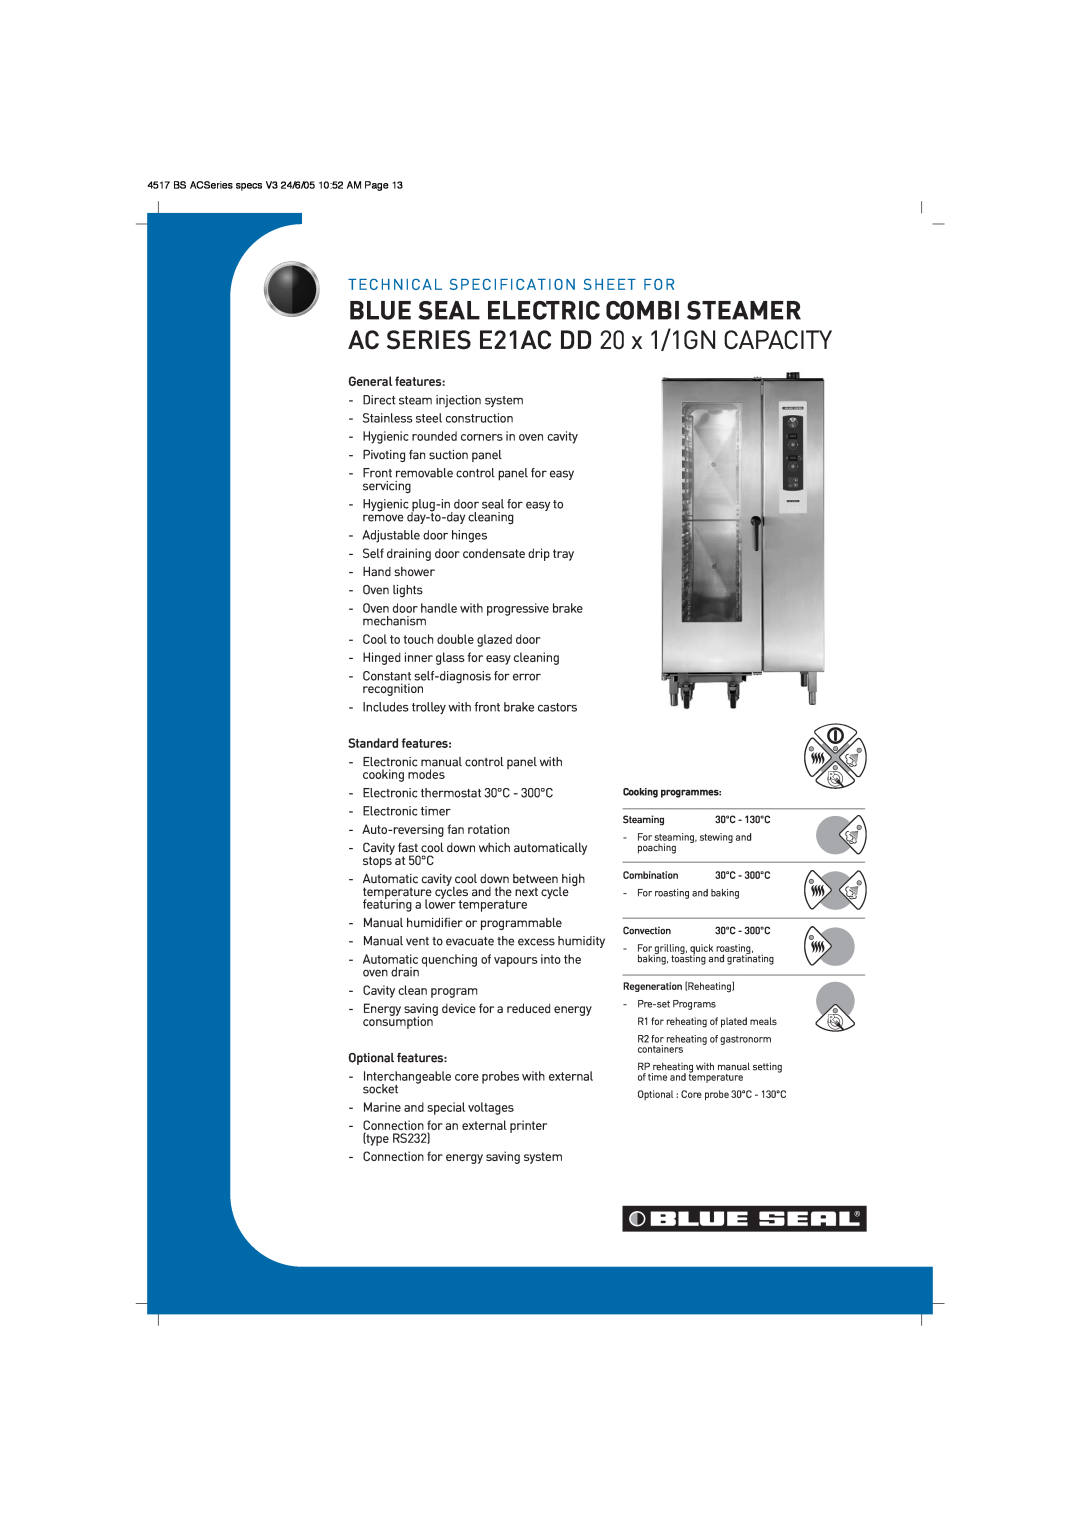 Moffat technical specifications Blue Seal Electric Combi Steamer, AC SERIES E21AC DD 20 x 1/1GN CAPACITY 